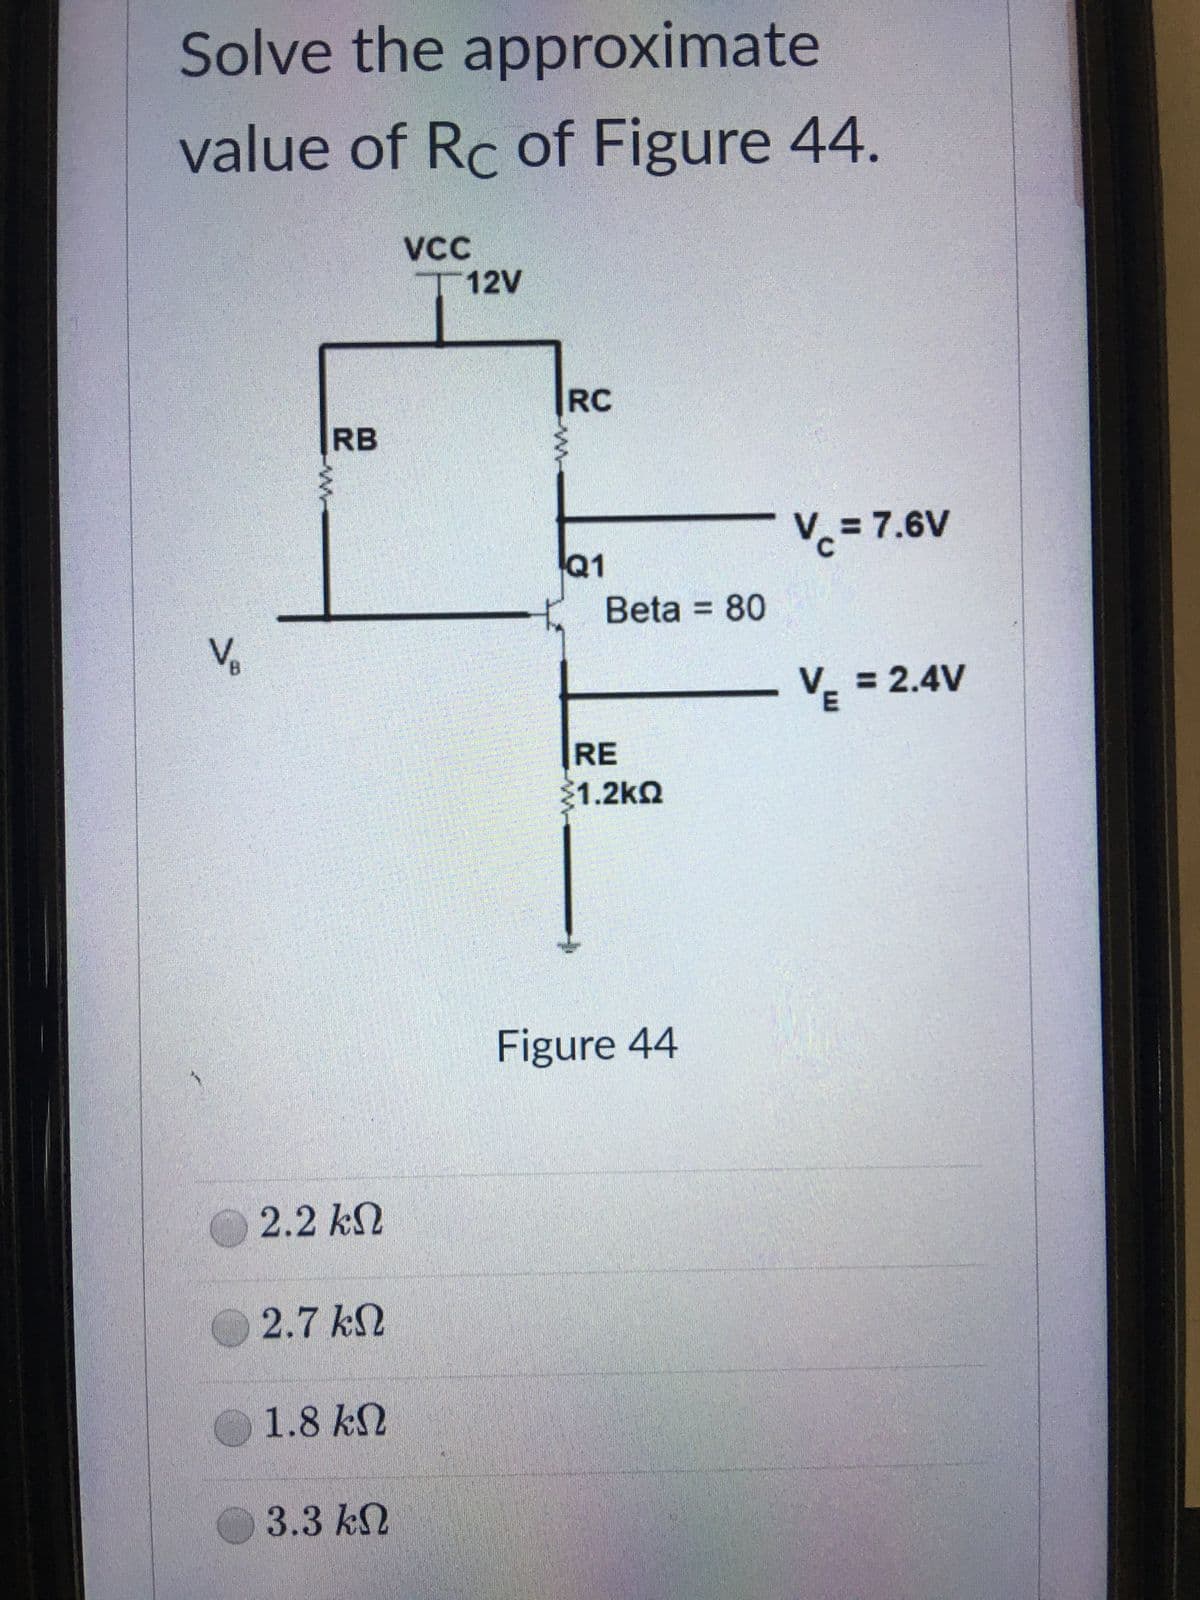 Solve the approximate
value of Rc of Figure 44.
VCC
12V
Vc = 7.6V
VE = 2.4V
V₁
B
RB
2.2 ΚΩ
2.7 ΚΩ
1.8 ΚΩ
3.3 ΚΩ
RC
Q1
Beta = 80
RE
31.2ΚΩ
Figure 44